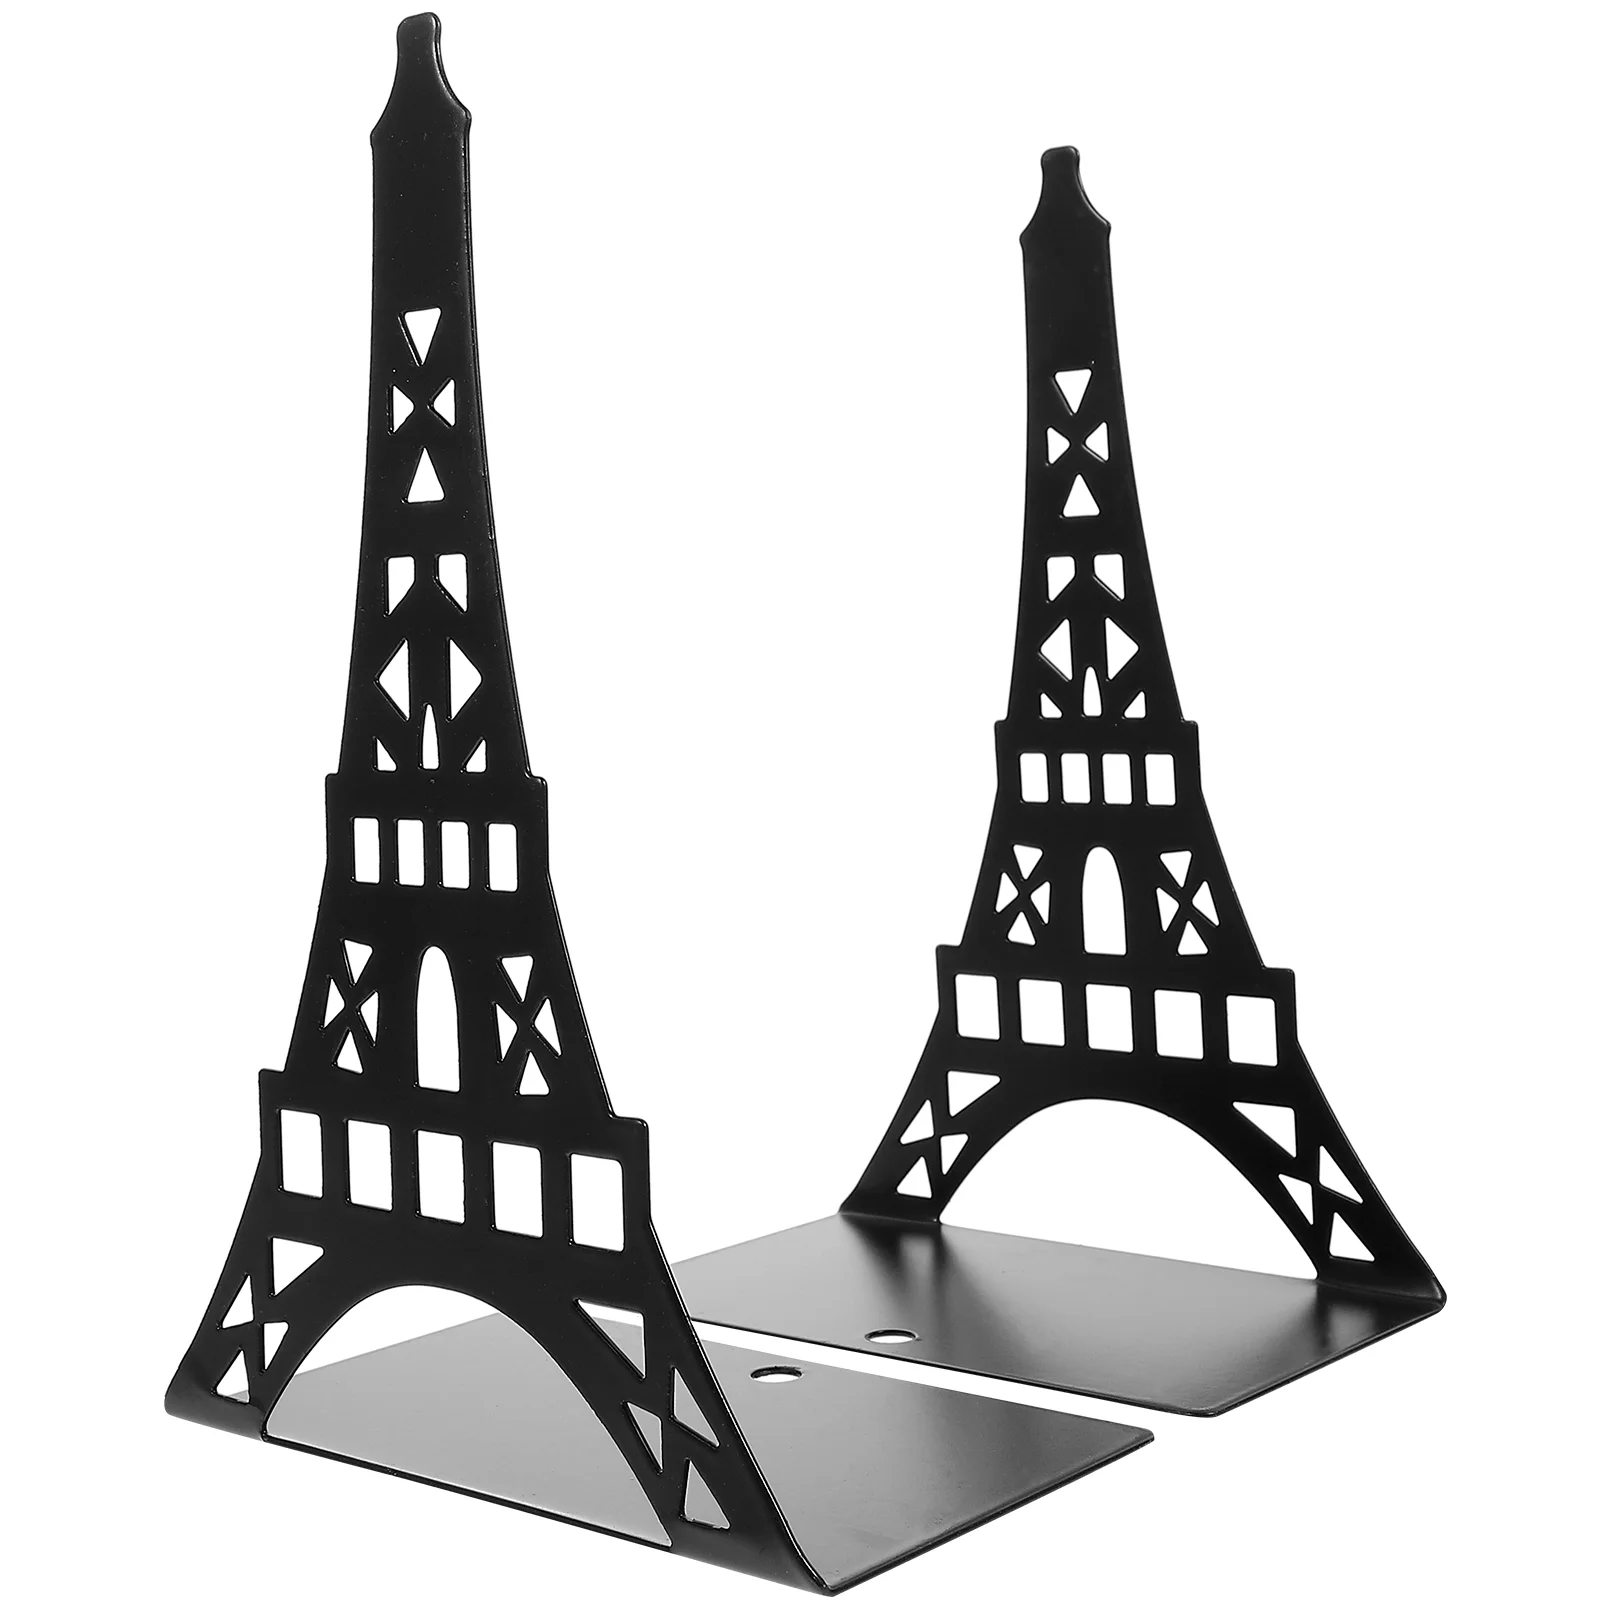 

2 Pcs Bookend Reusable Holders Bookcase Kids Room Tower Shape Stands Bookshelf File Organizer Metal Reading Ends Crafted